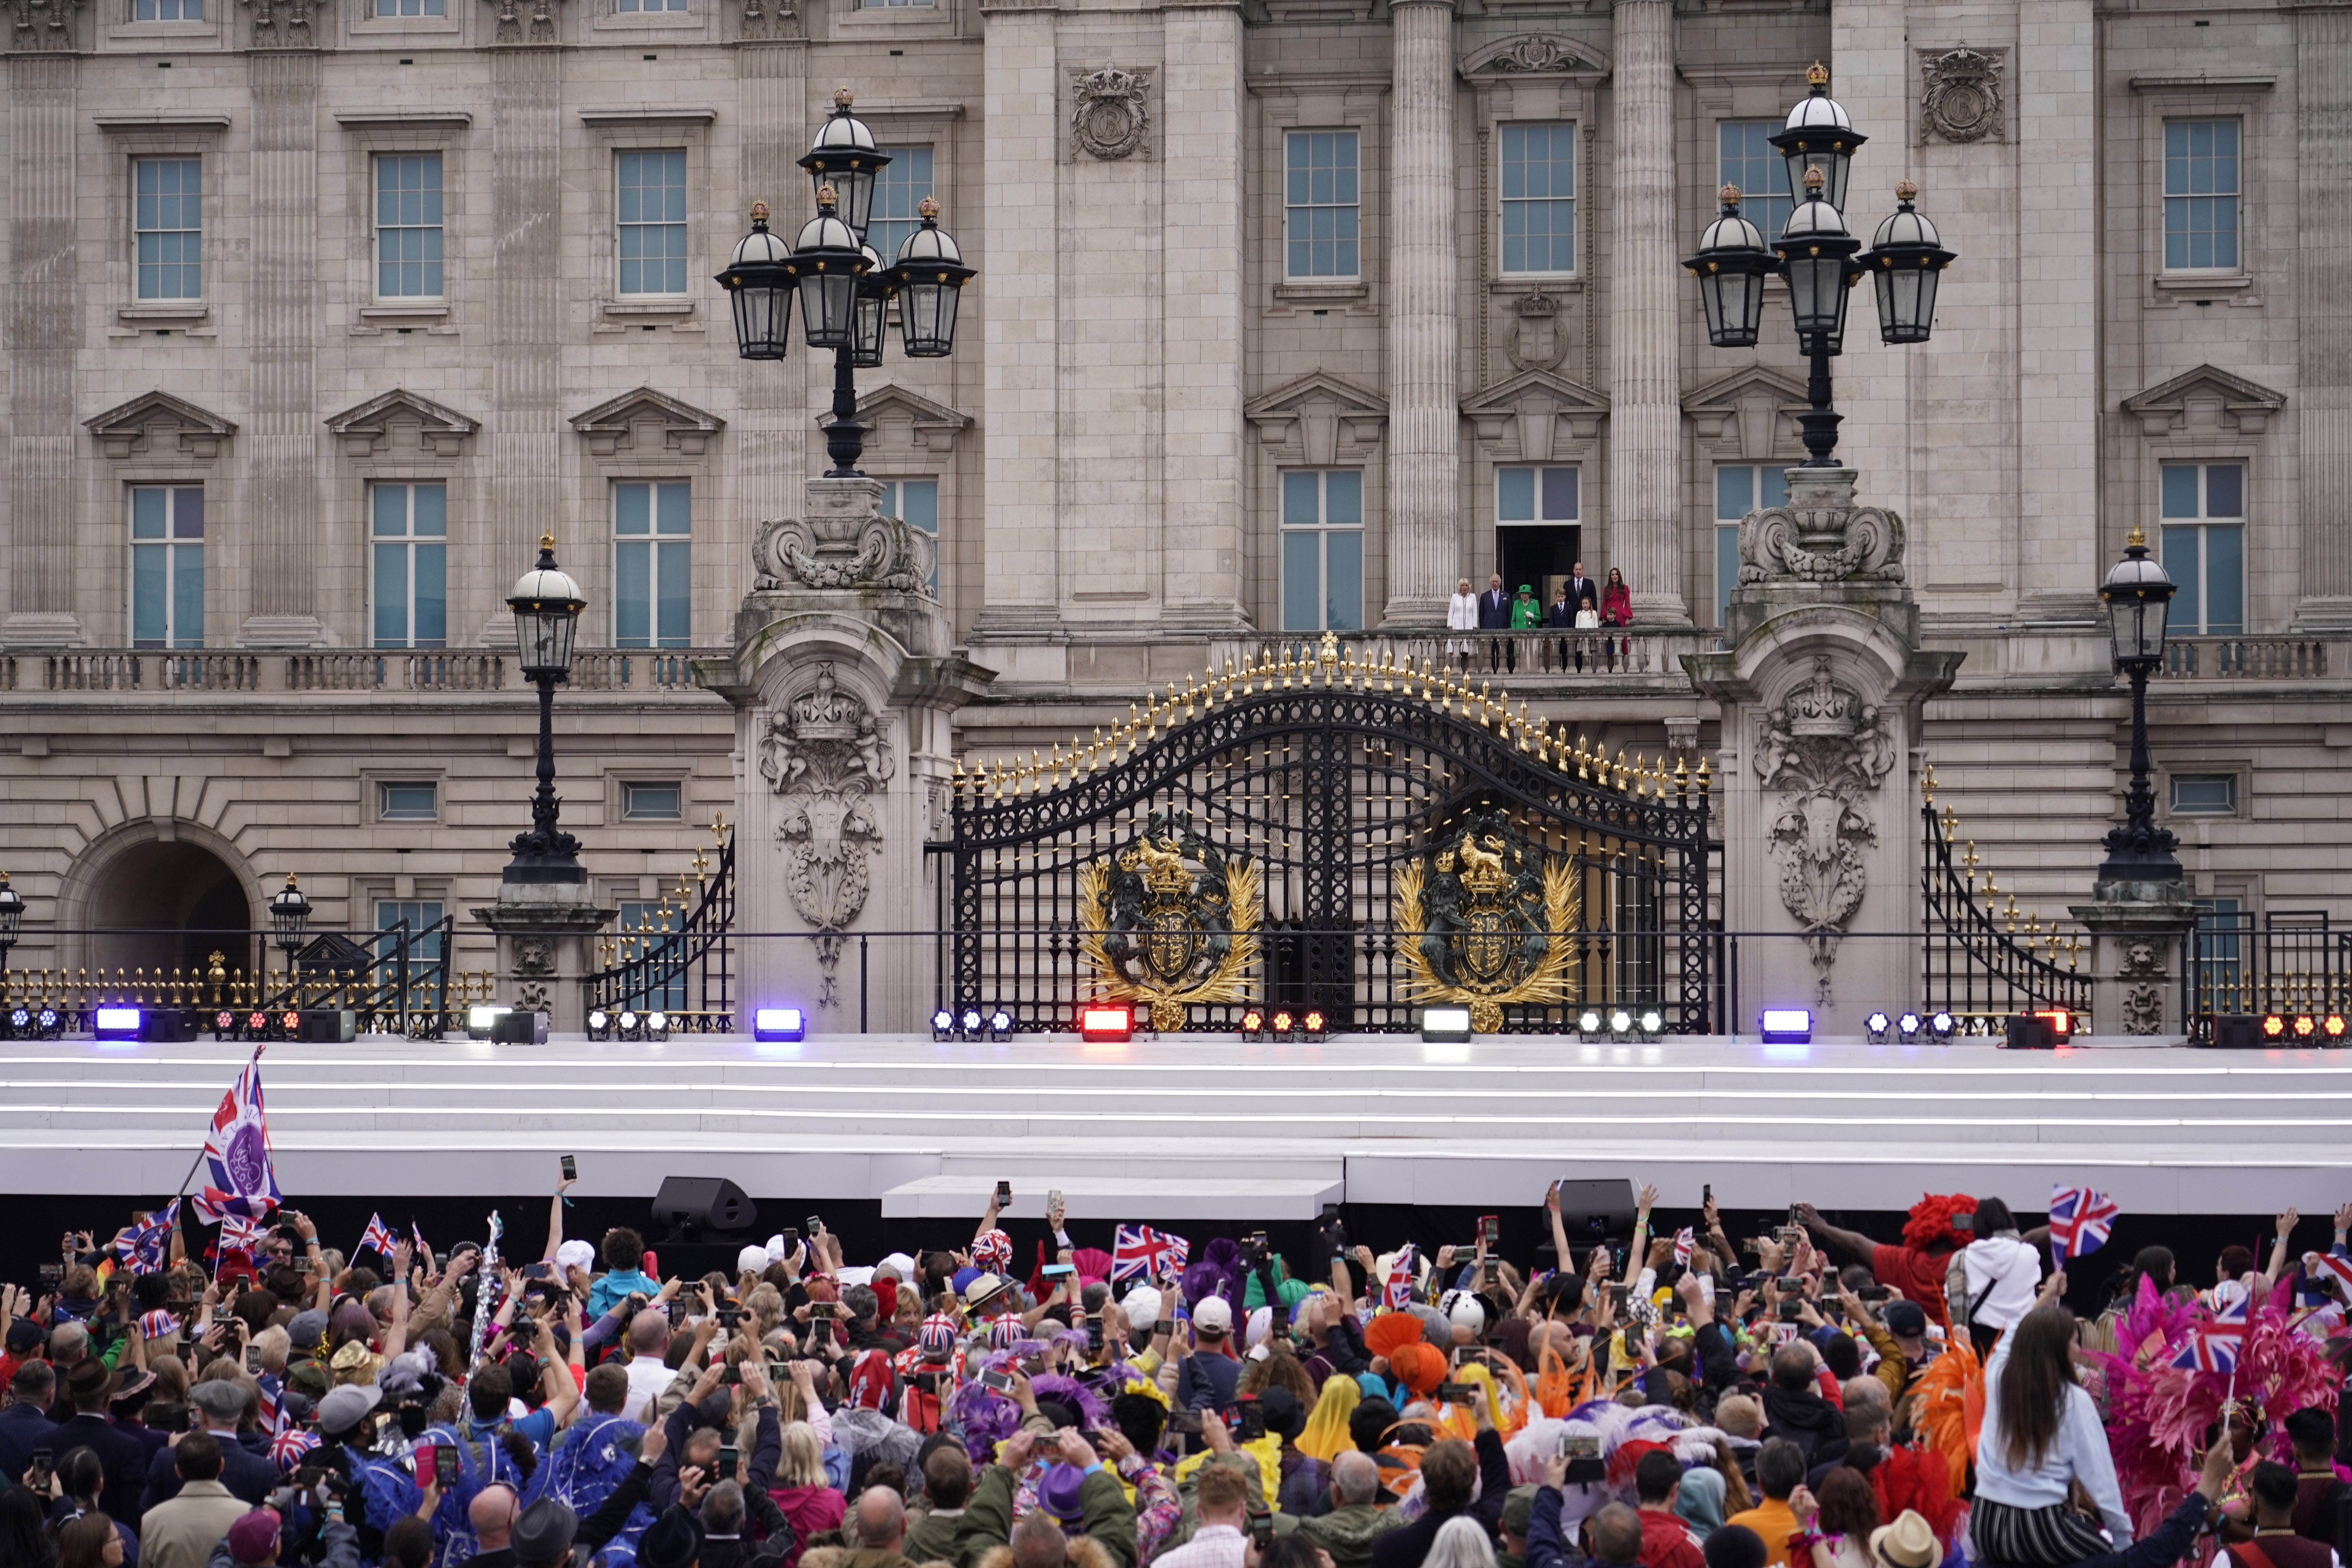 The Royal Family stands on a balcony of Buckingham Palace overlooking a large crowd of people waving flags. 